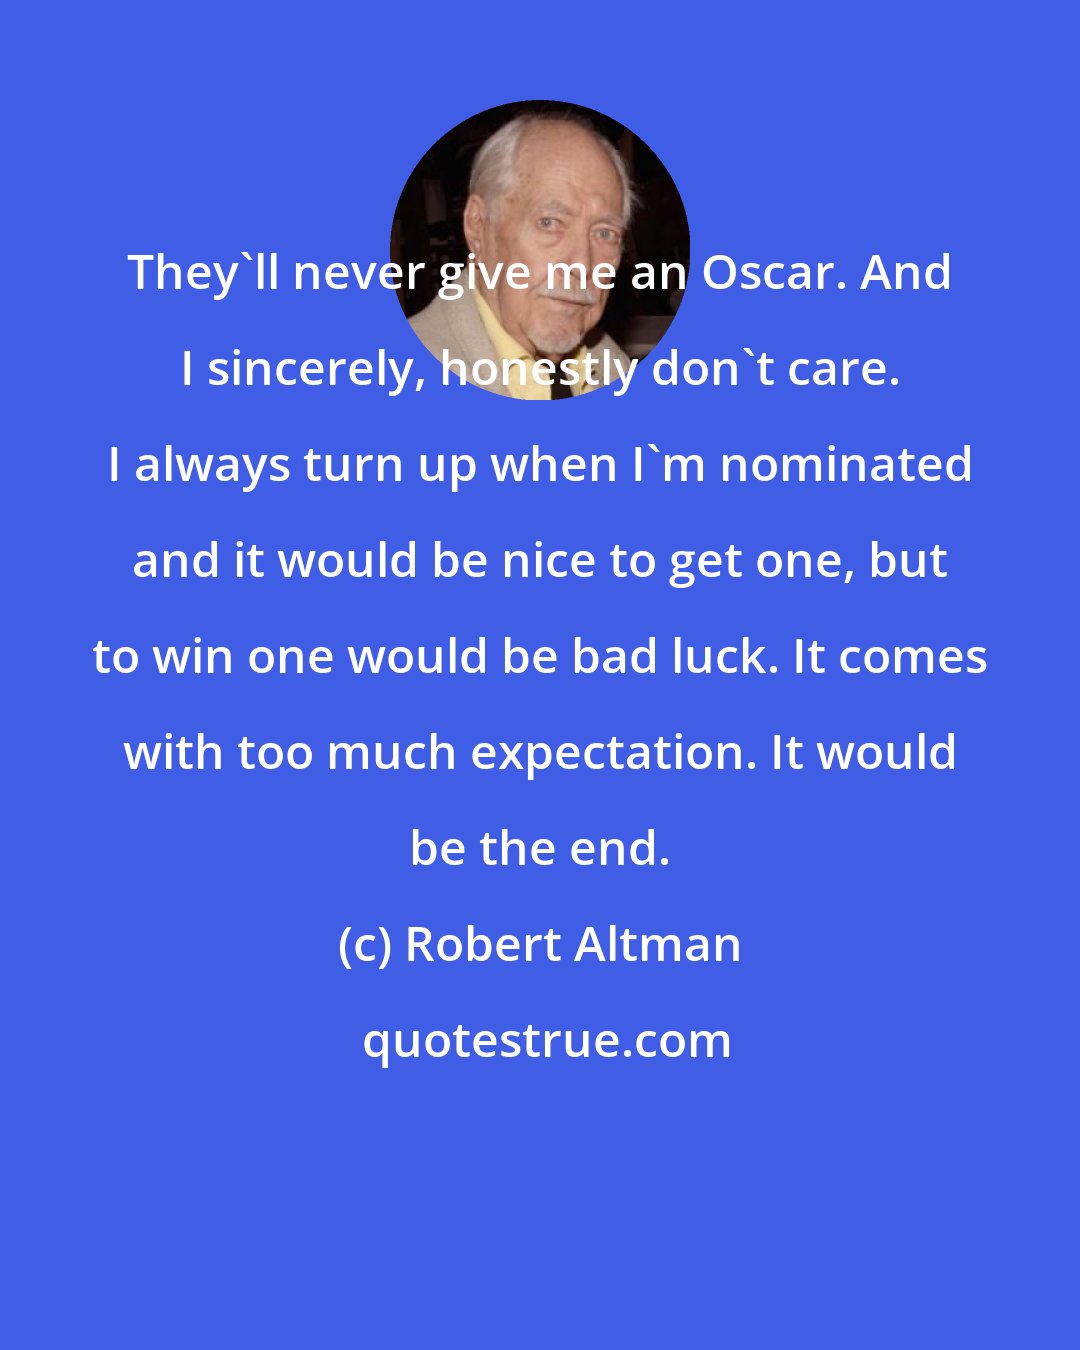 Robert Altman: They'll never give me an Oscar. And I sincerely, honestly don't care. I always turn up when I'm nominated and it would be nice to get one, but to win one would be bad luck. It comes with too much expectation. It would be the end.